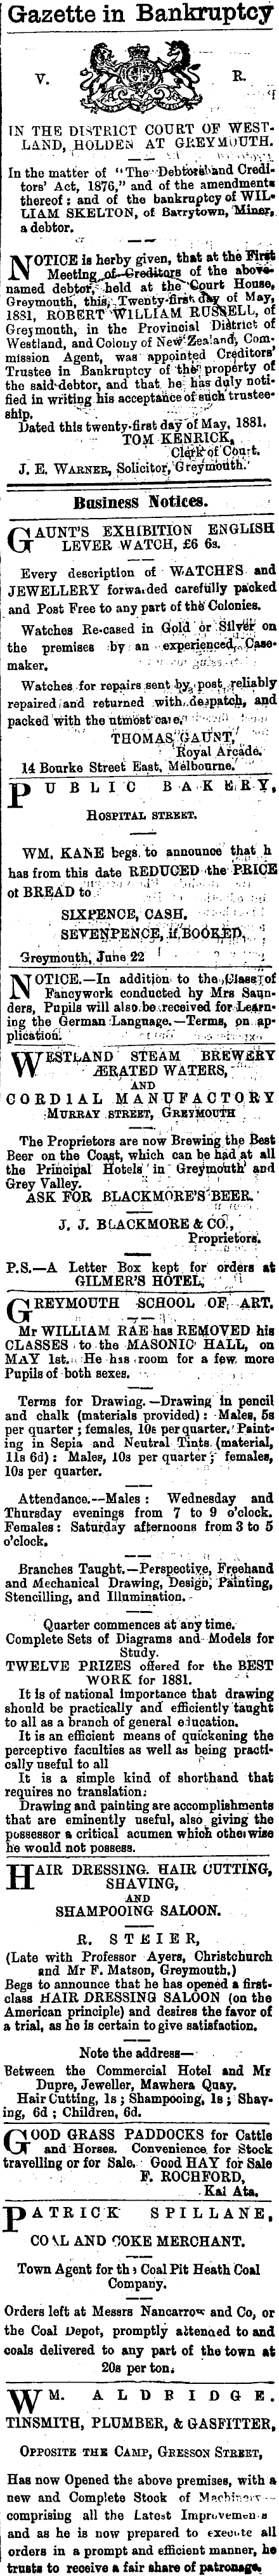 Papers Past | Newspapers | Grey River Argus | 24 May 1881 | Page 3  Advertisements Column 5